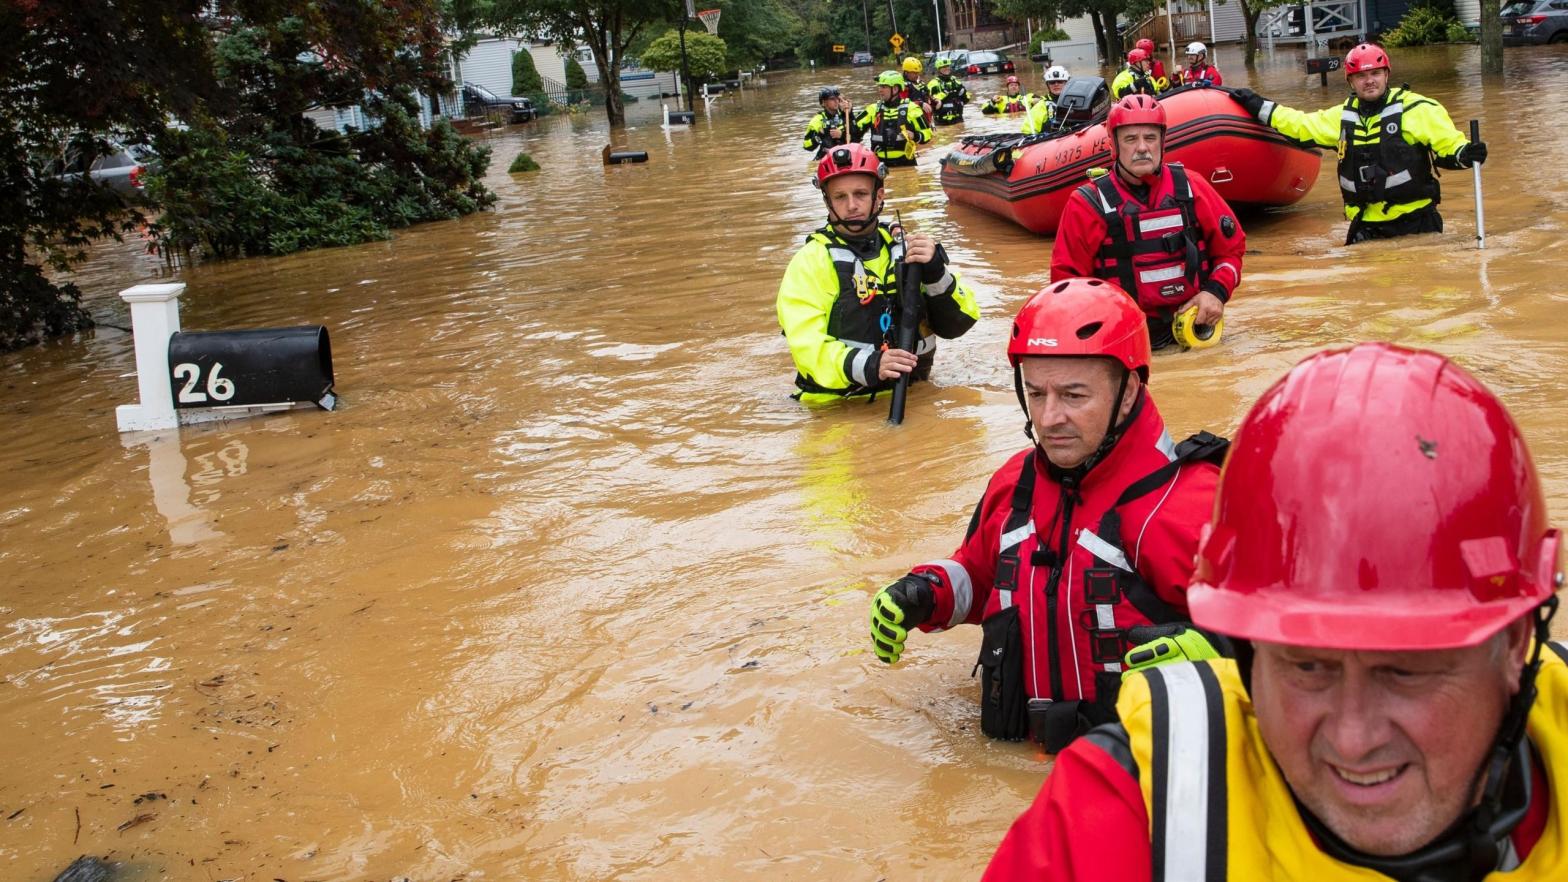 Members of the New Market Volunteer Fire Company perform a secondary search during an evacuation effort following a flash flood in Helmetta, New Jersey, on August 22, 2021, as a result of Tropical Storm Henri. (Photo: Tom Brenner, Getty Images)